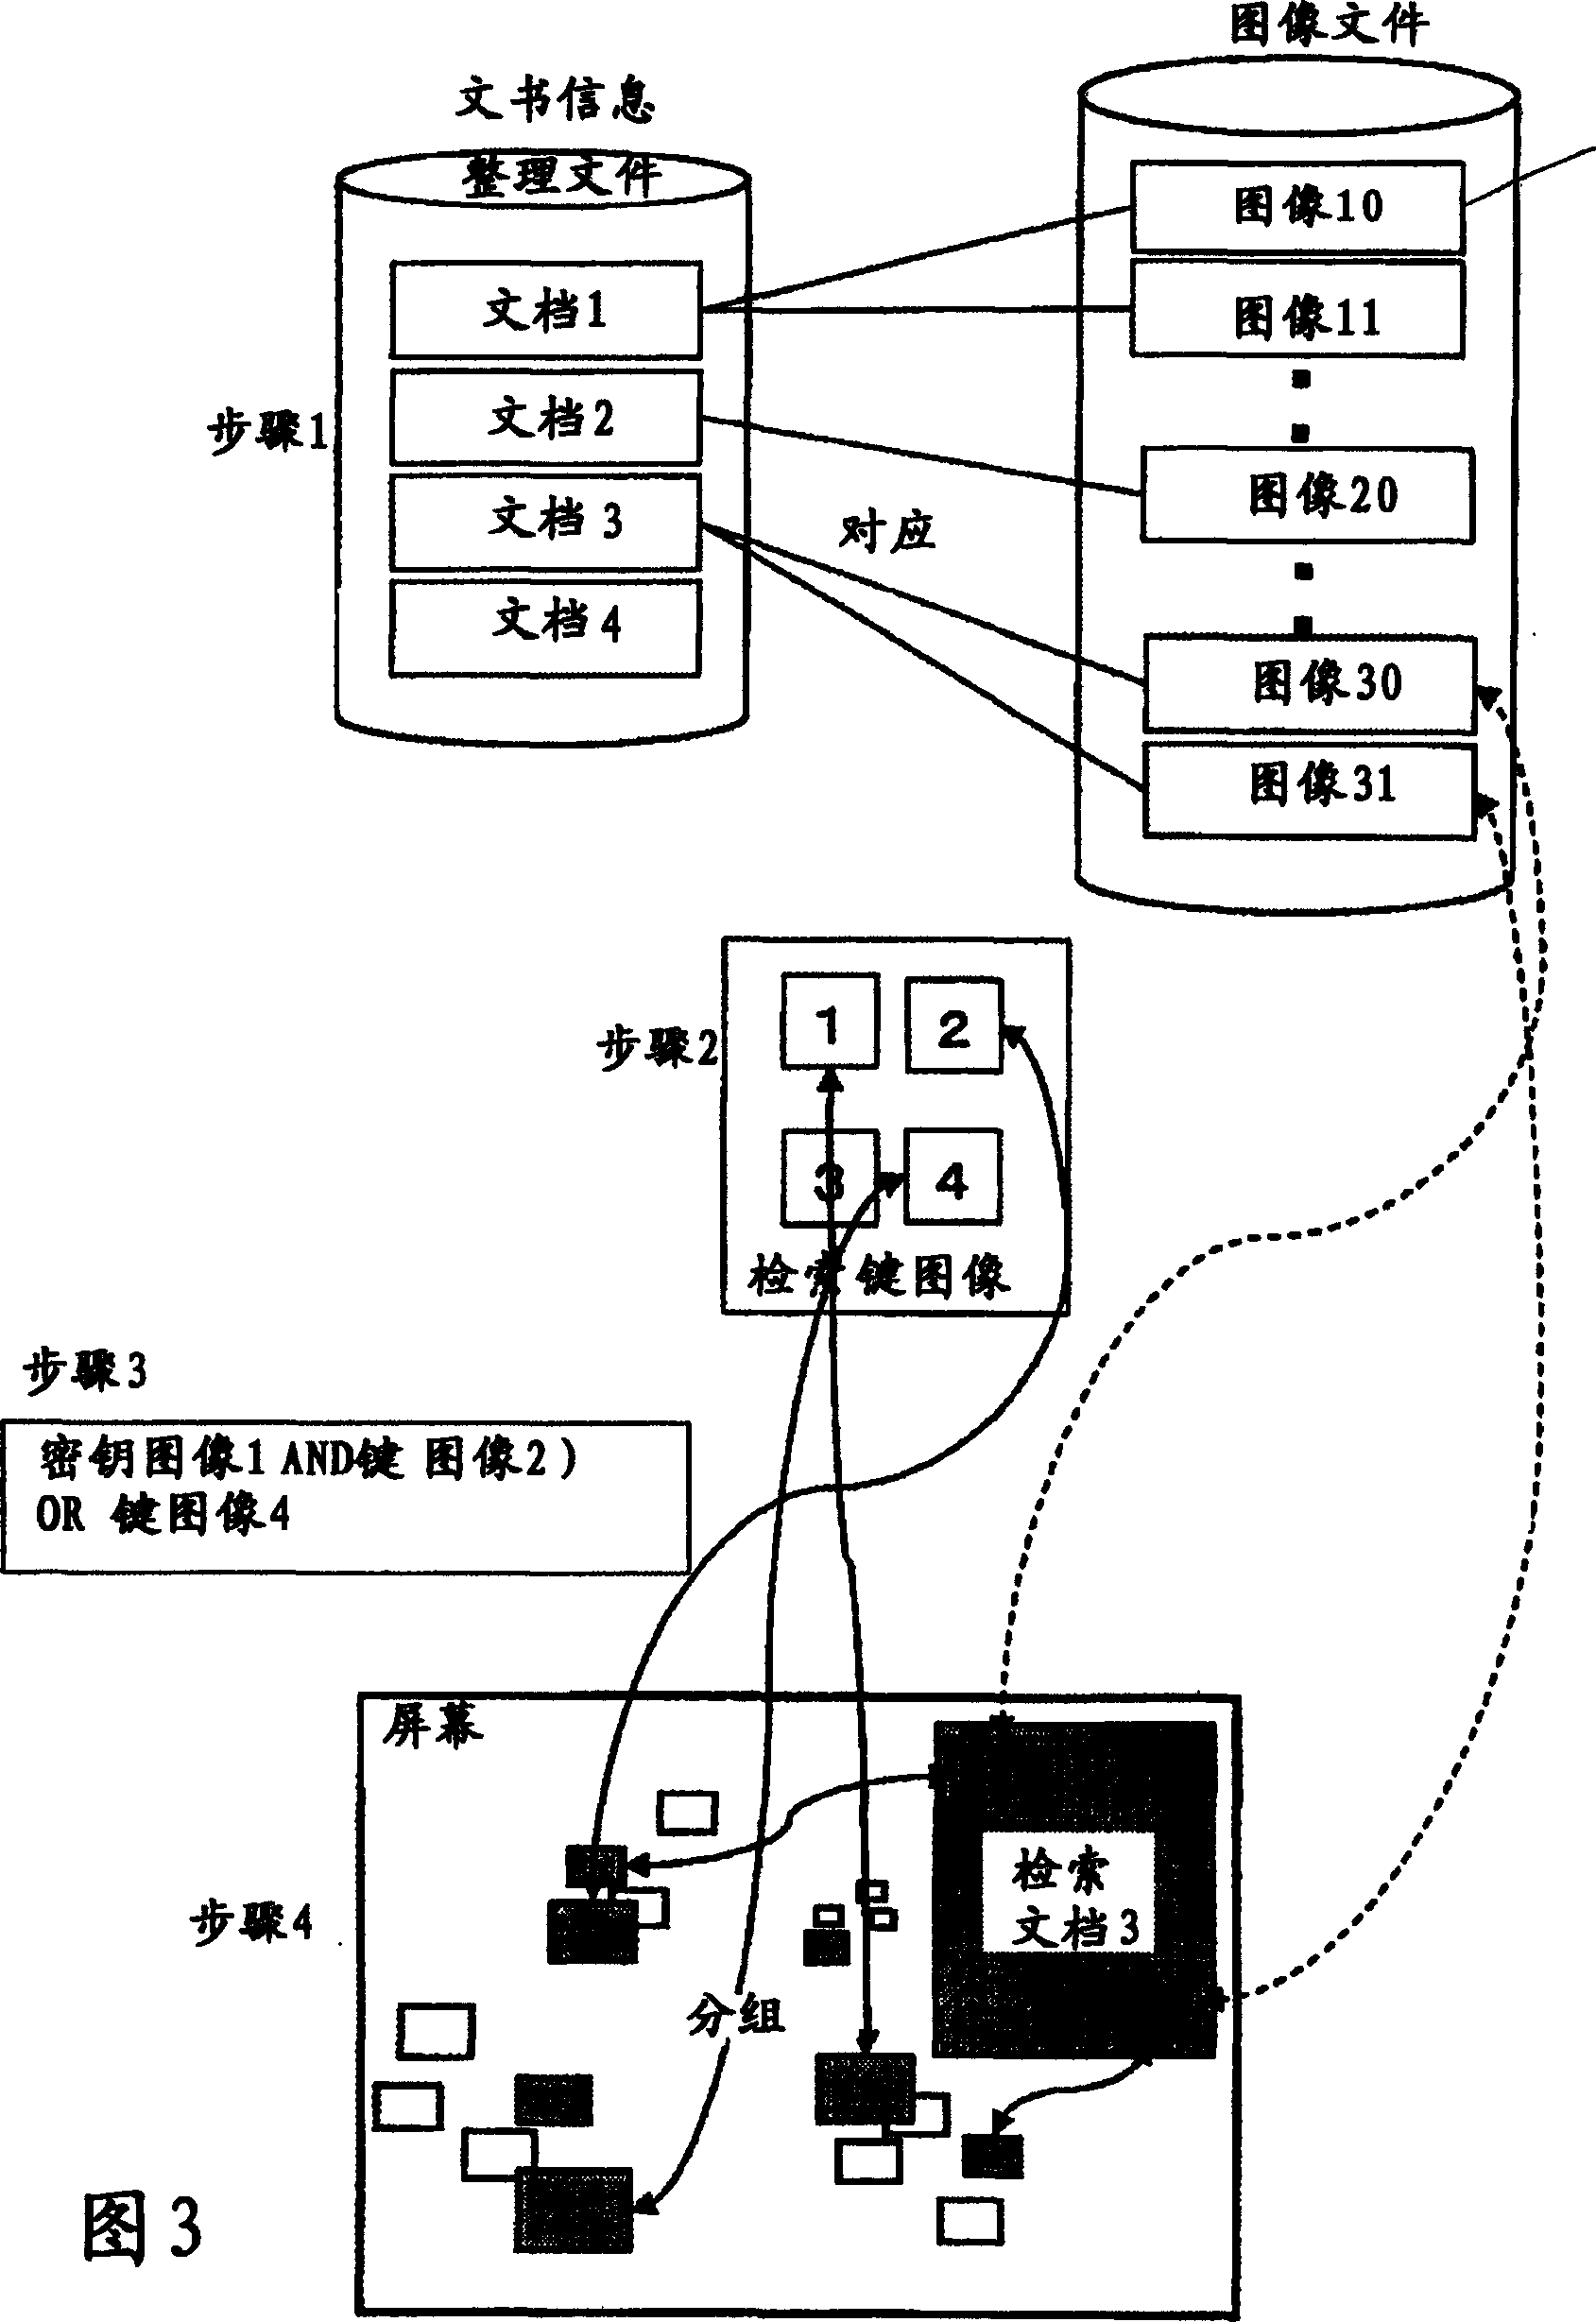 Document retrieval method and apparatus using image contents